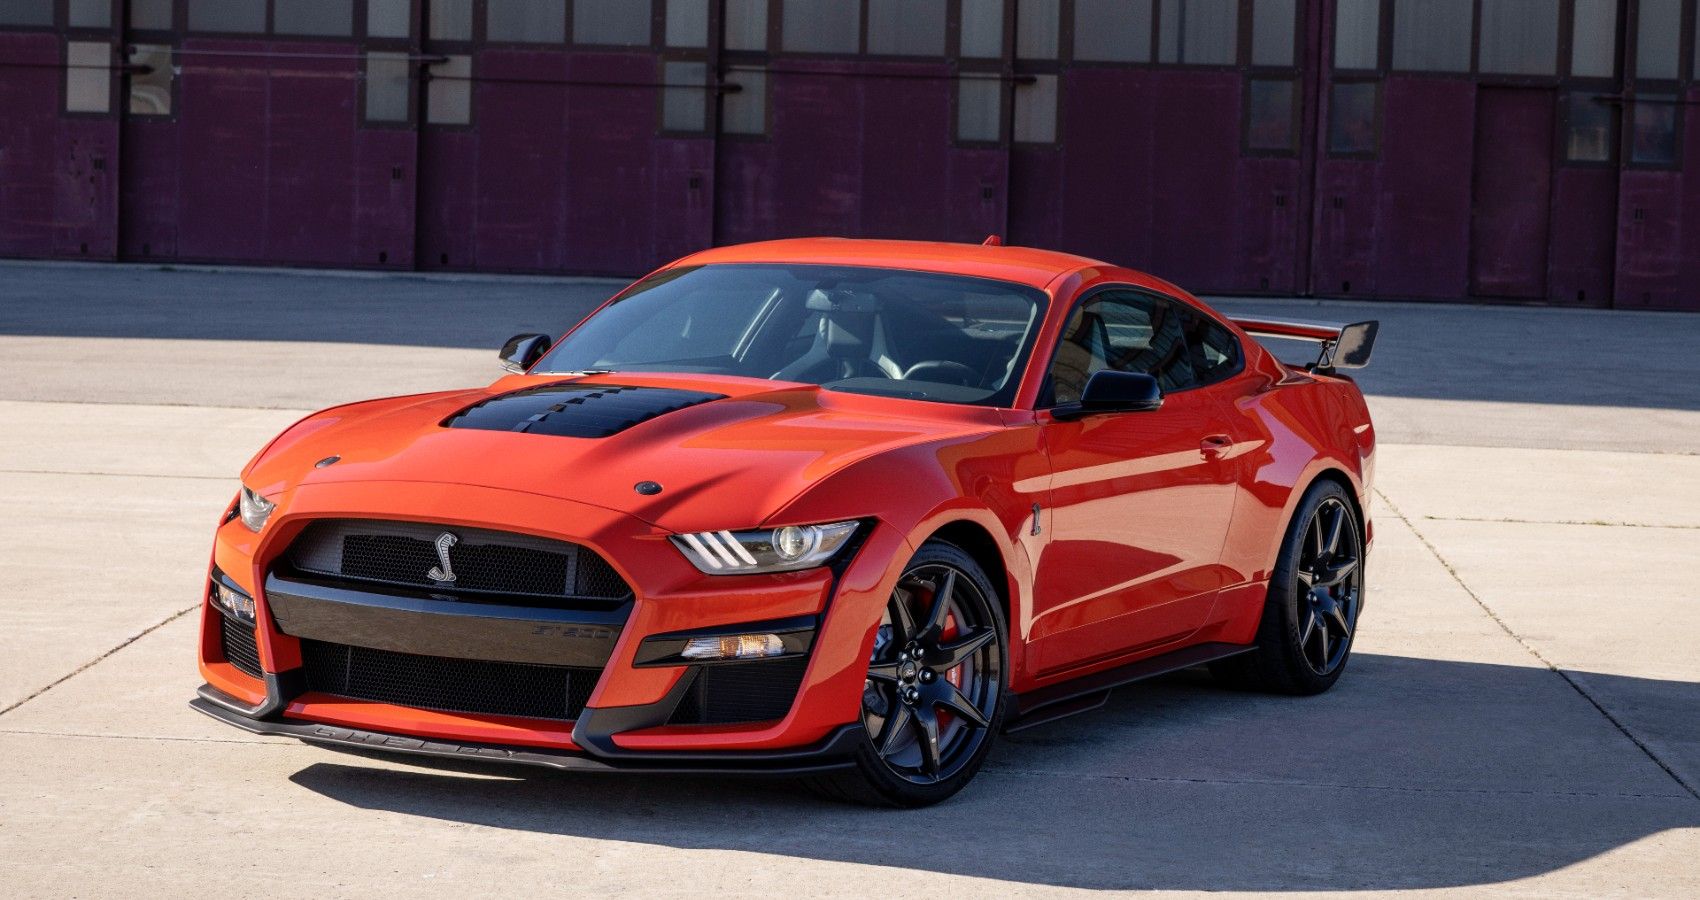 Why The Shelby Mustang GT500 Muscle Car Is A Supercar In Disguise